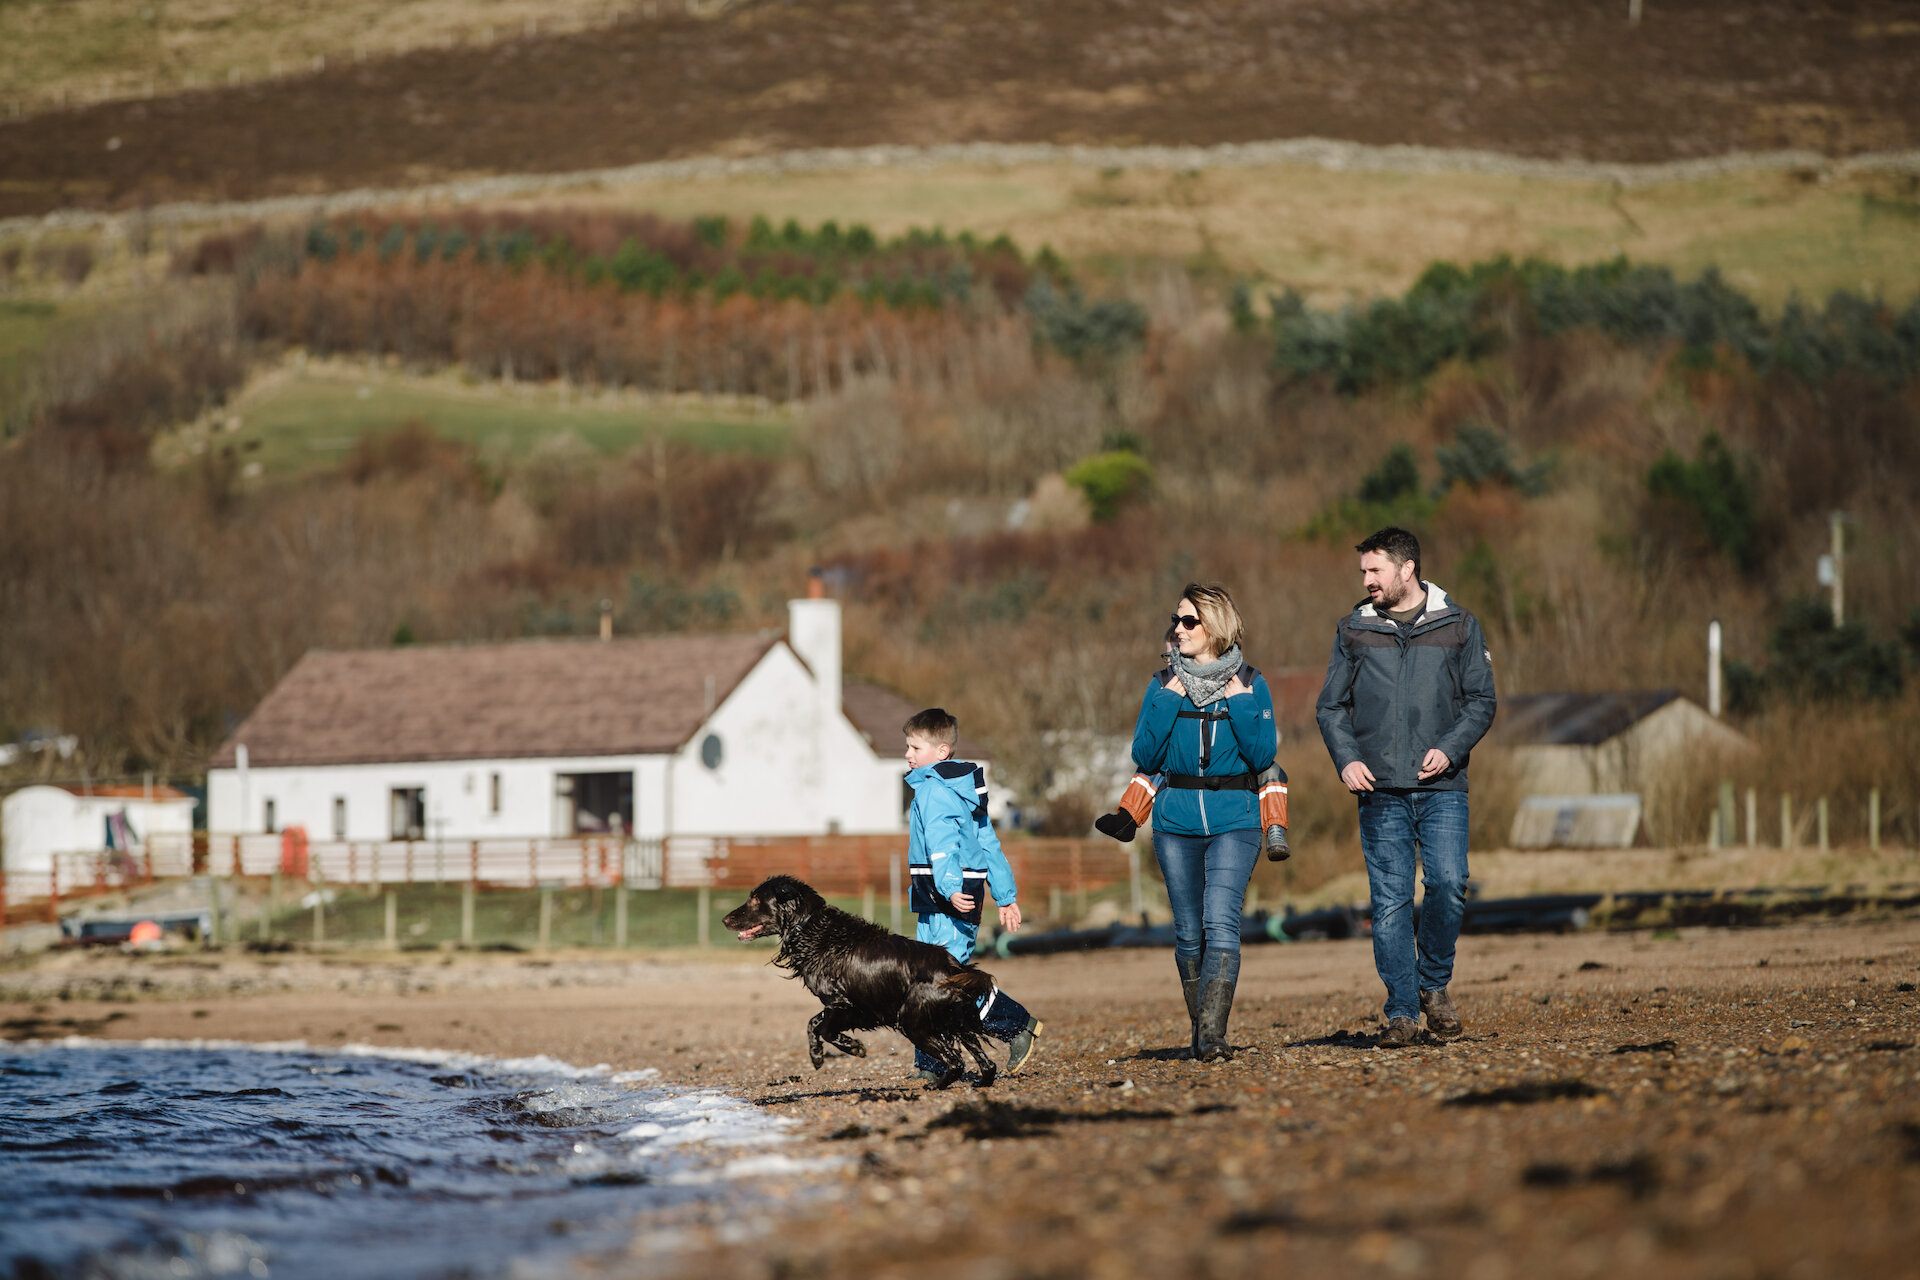 The beach is in easy reach for the family - a wonderful place to exercise their dog.